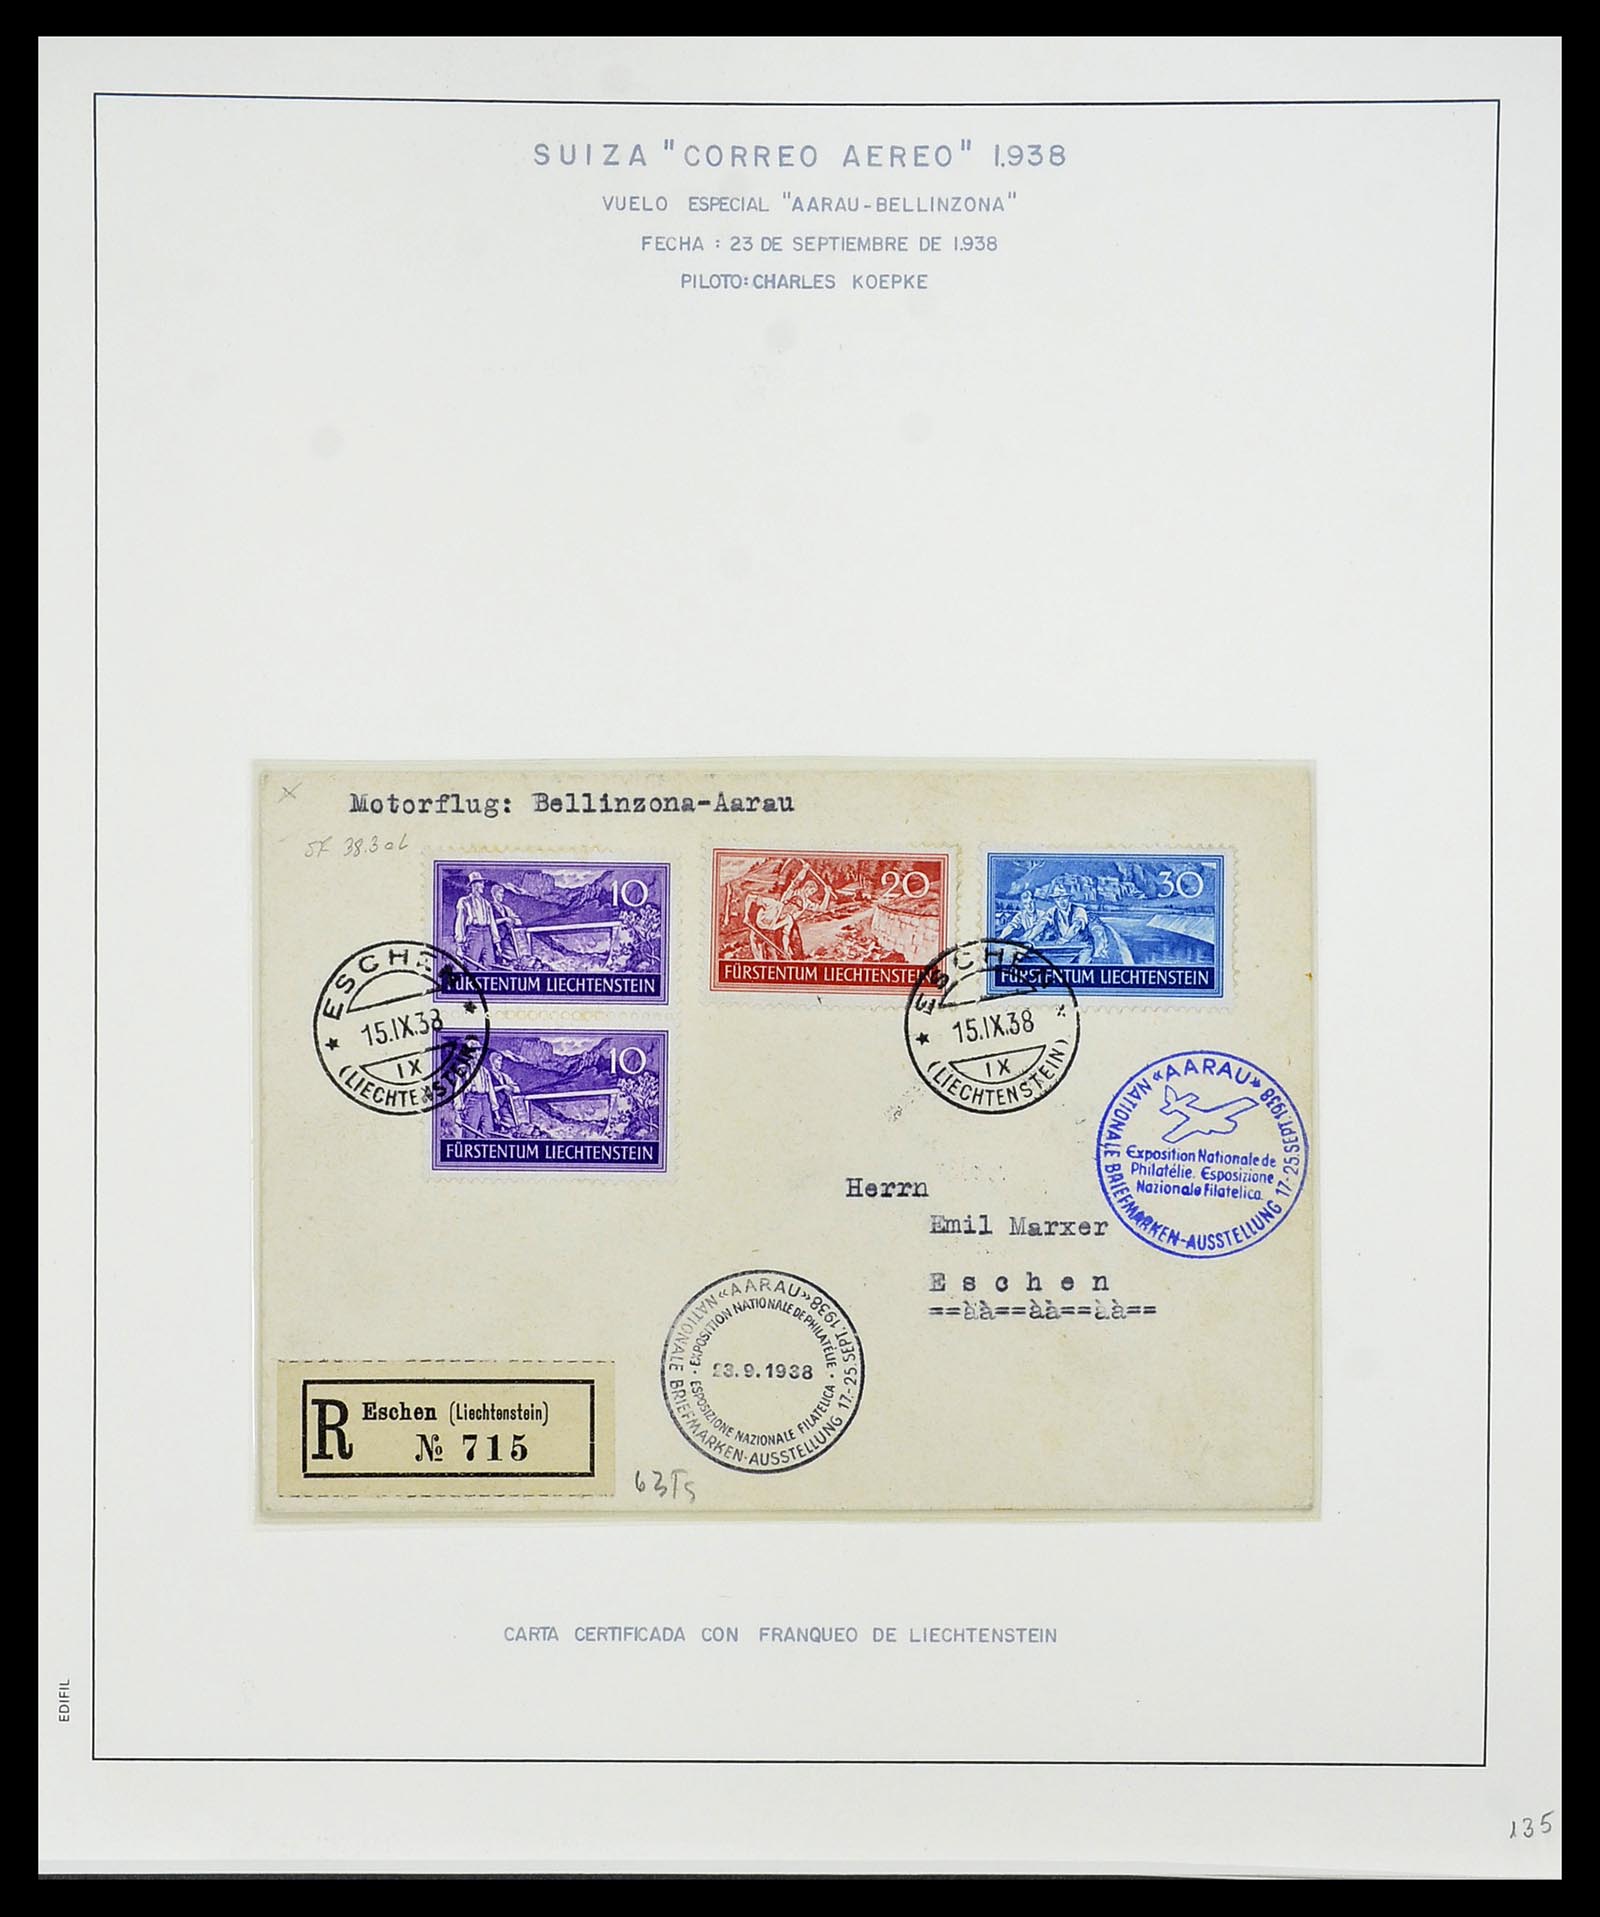 34137 073 - Stamp collection 34137 Switzerland airmail covers 1923-1963.